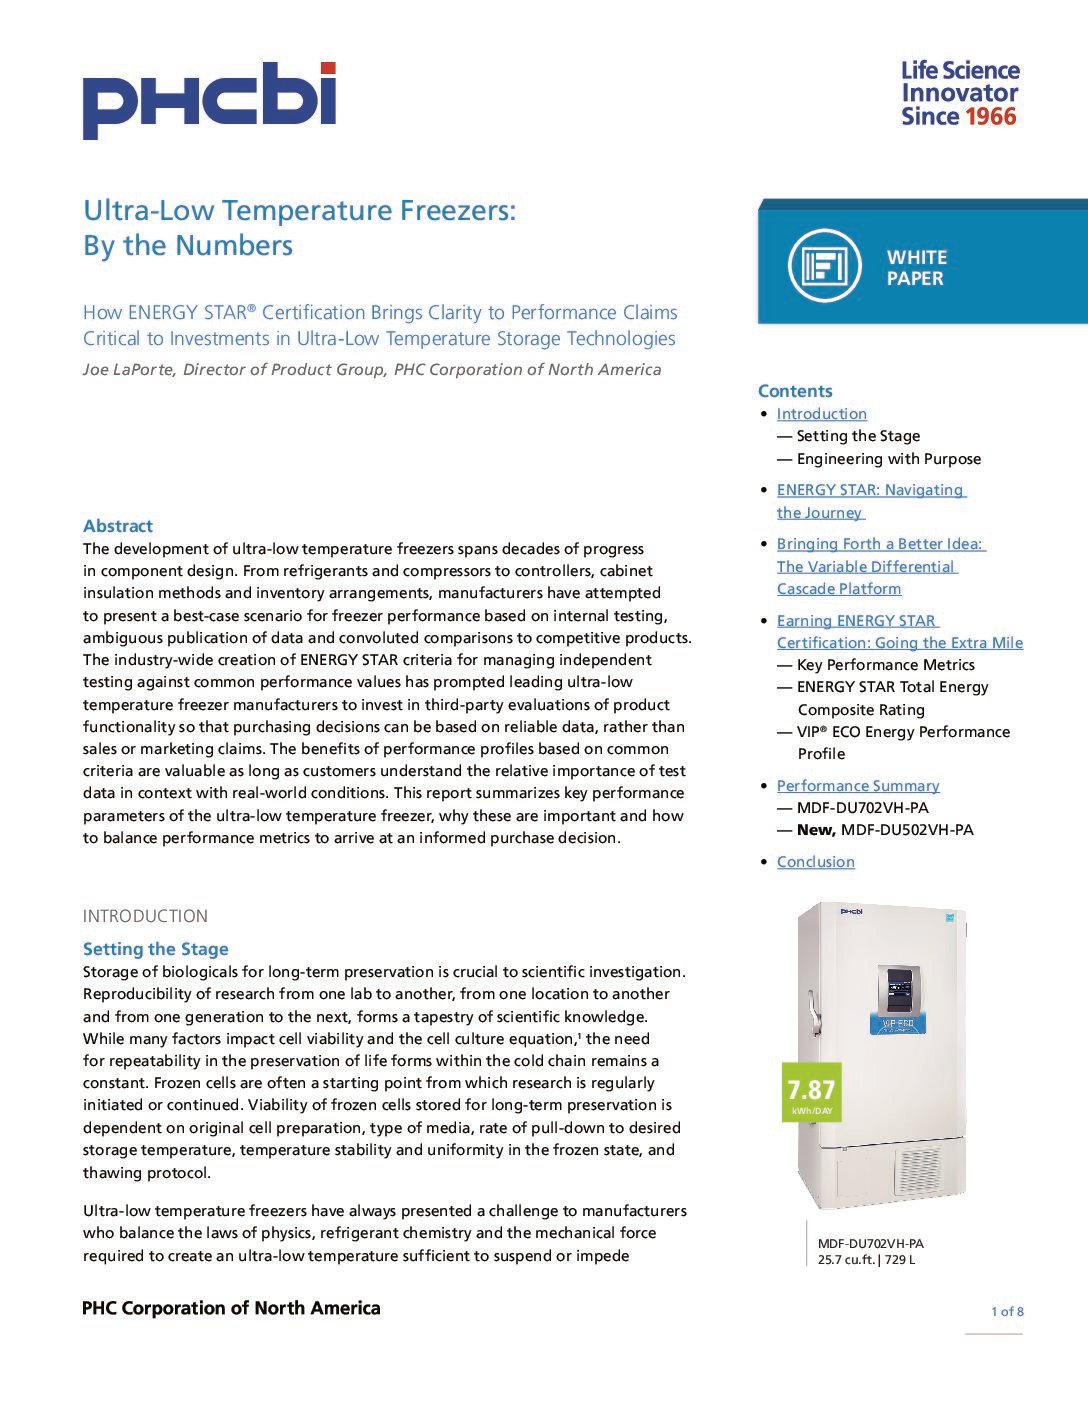 ULT Freezer by the Numbers-Energy Star